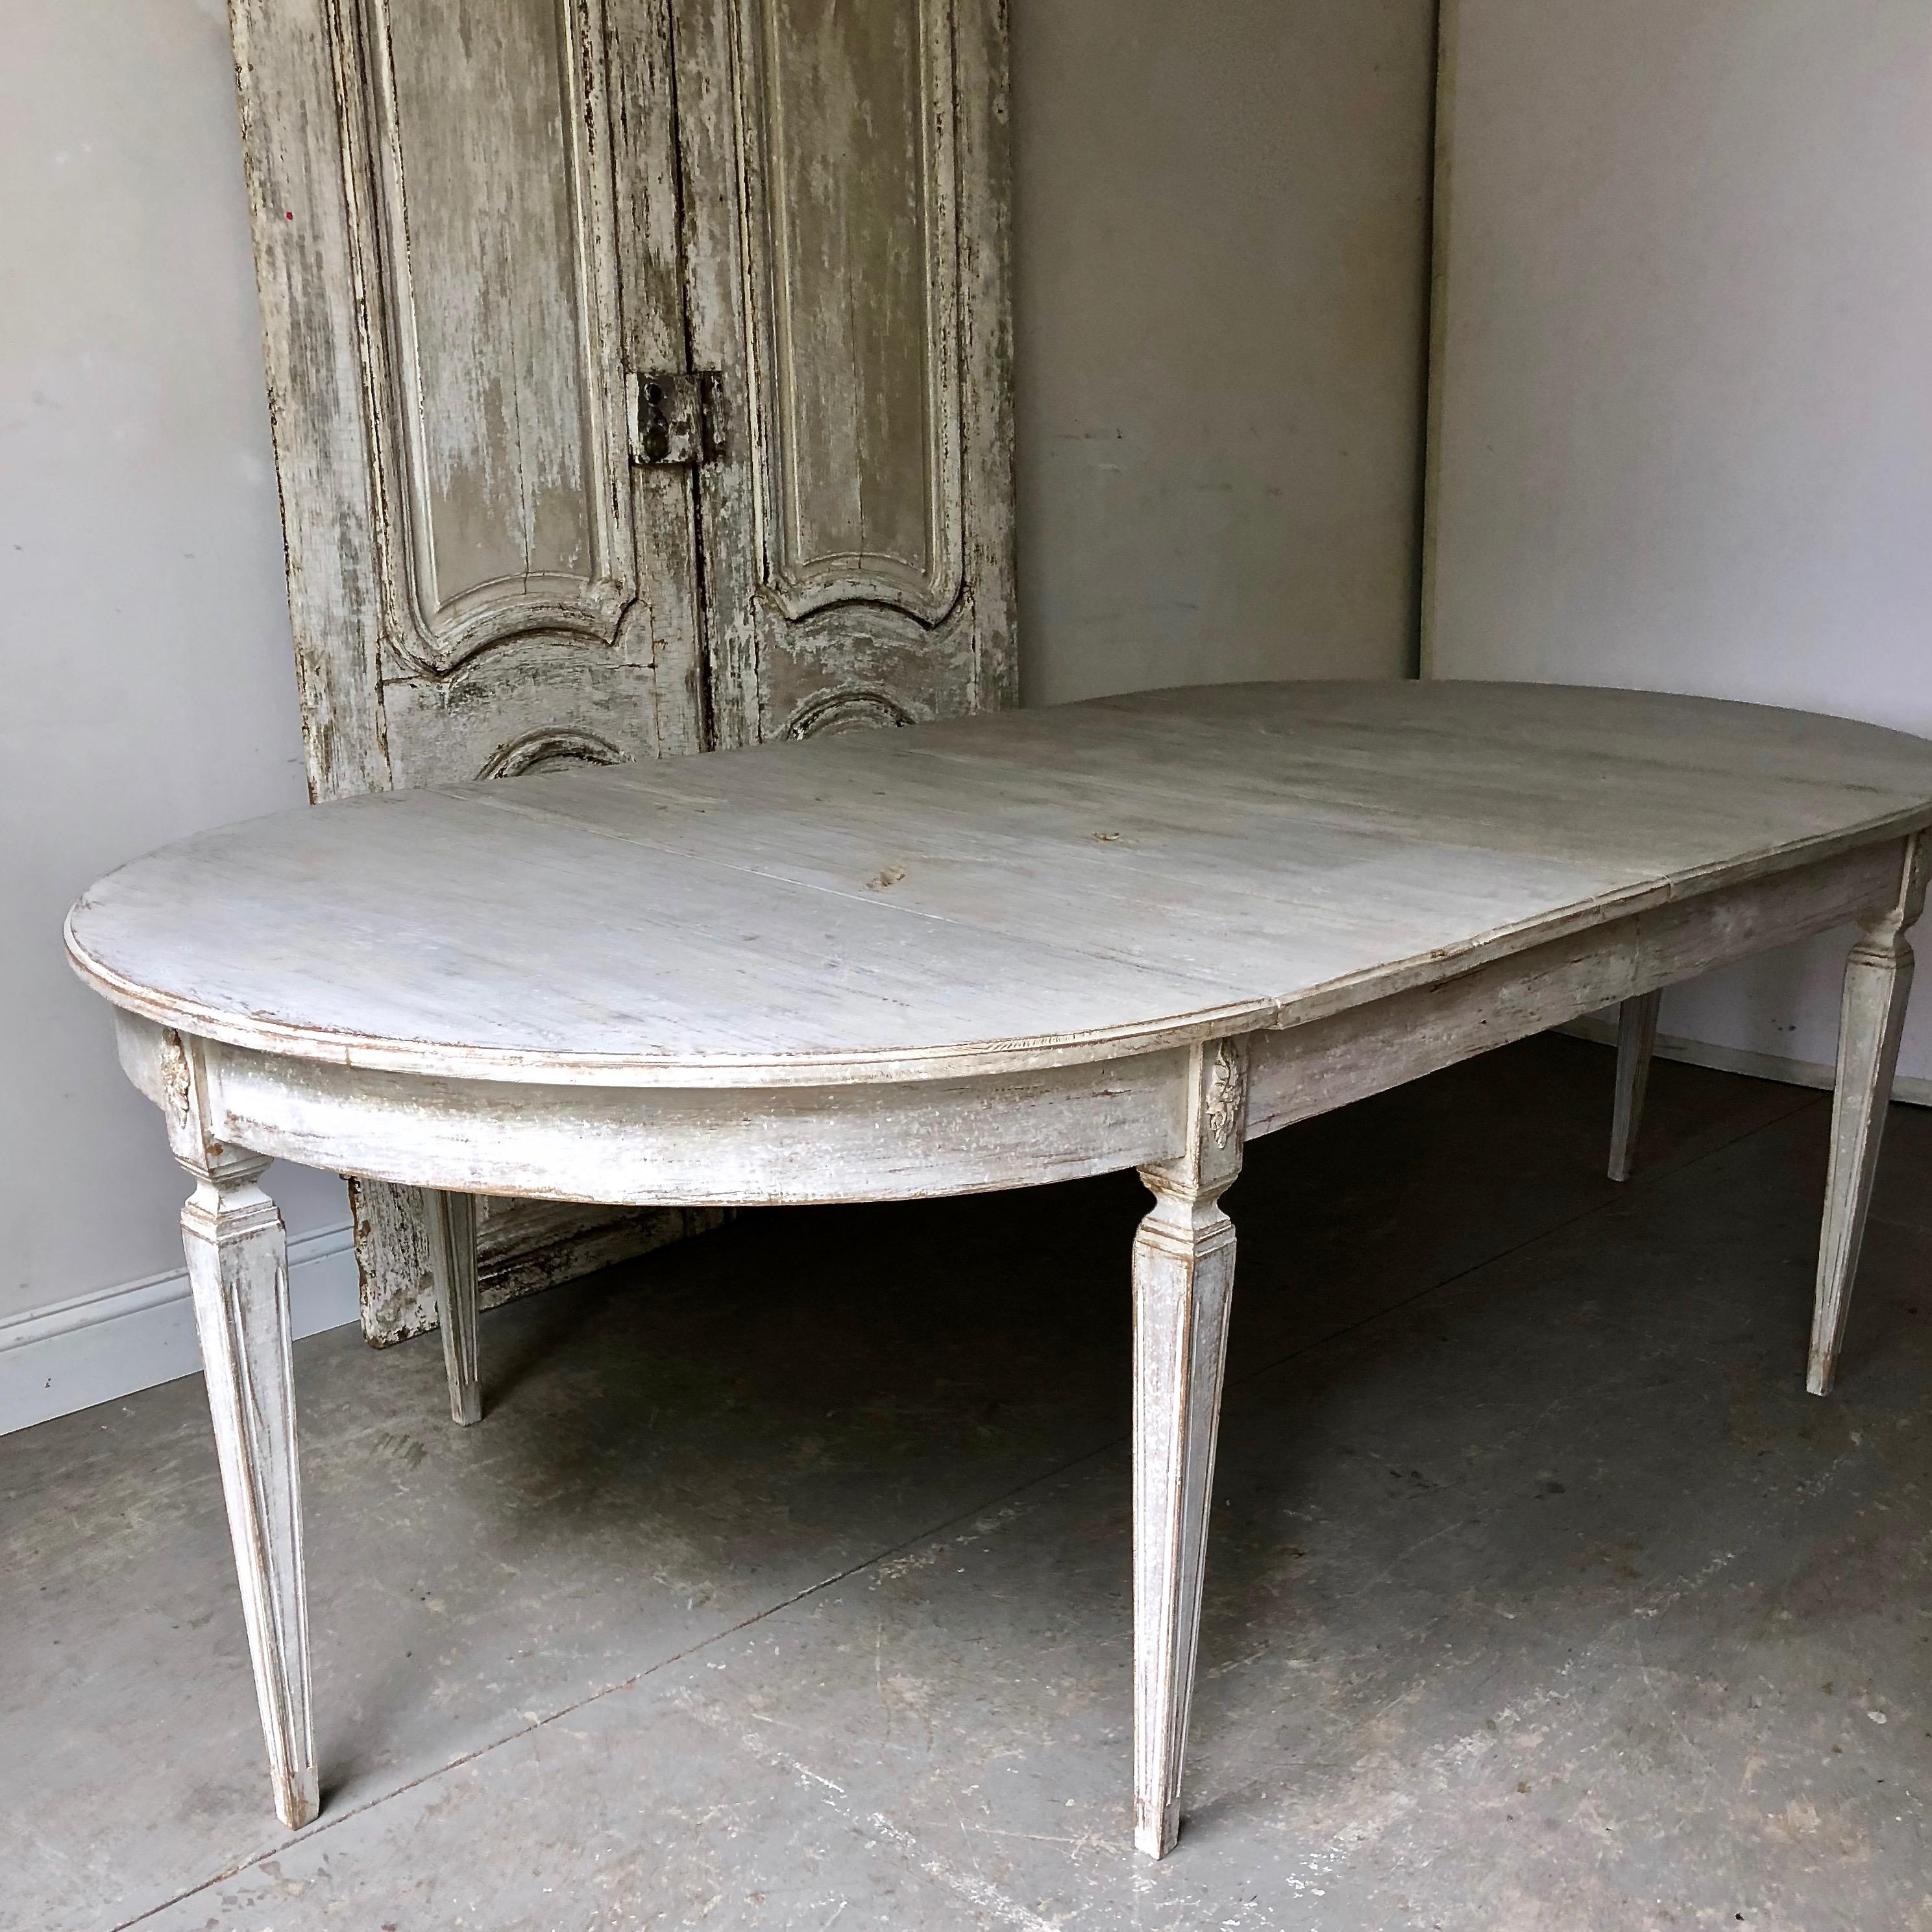 Early 19th century painted Gustavian period extending table with two leaves and tapered legs with flower corner blocks. A practical piece that can be used as round table/ a pair of consoles or extended with one or two leaves up to 94.50